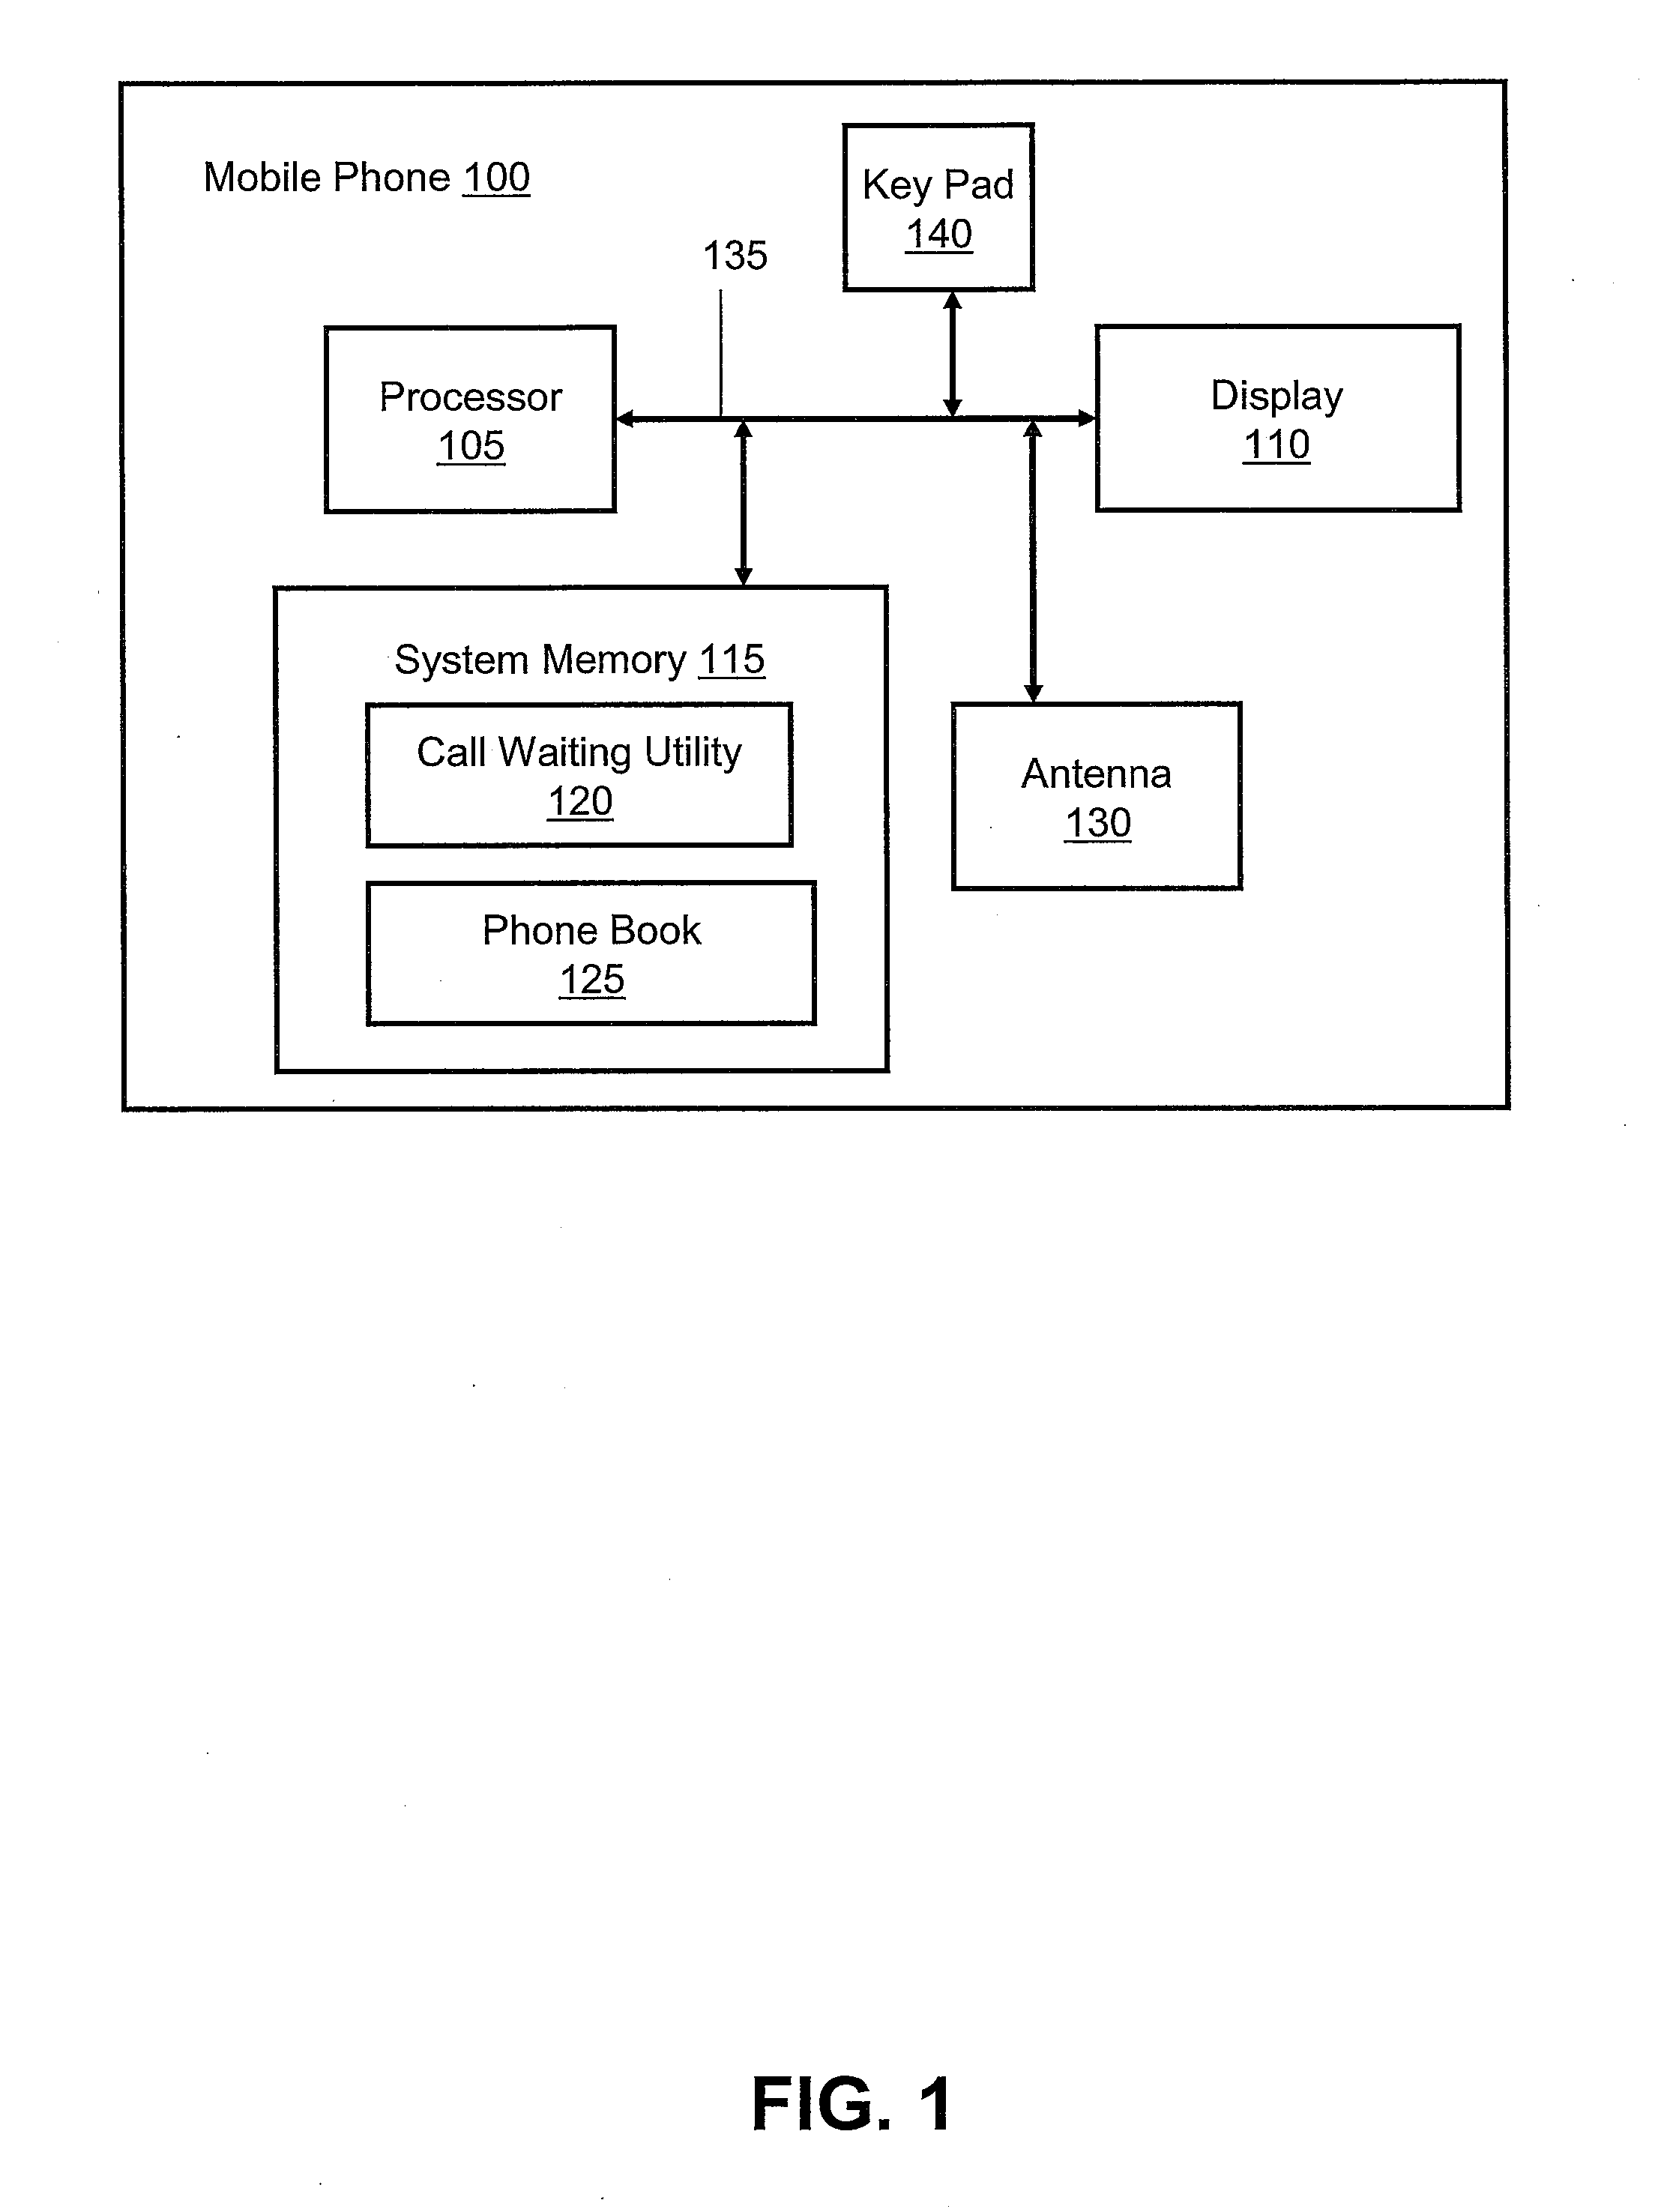 Method and system for assigning call waiting priorities to phone numbers